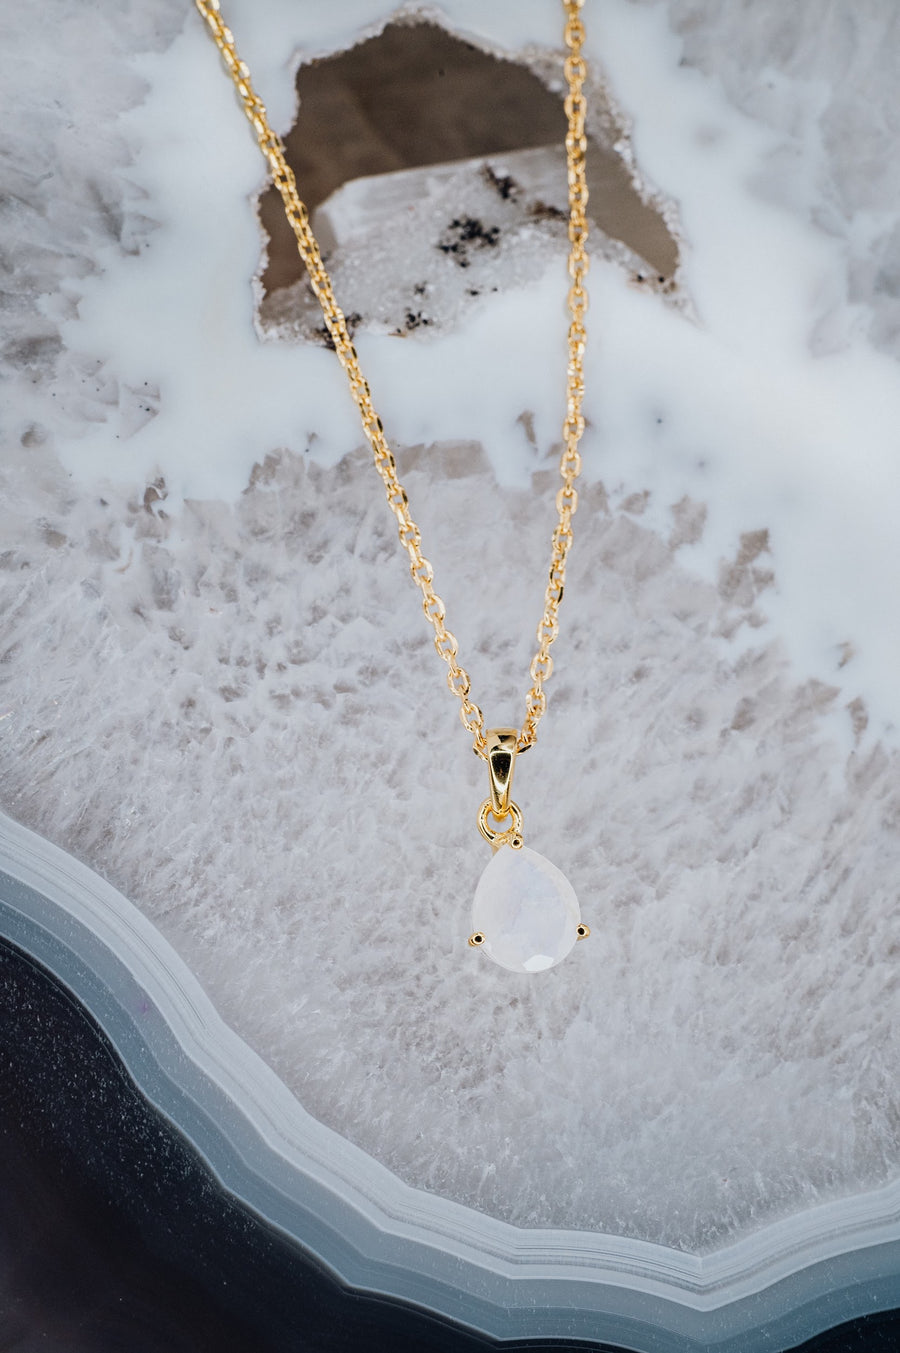 Teardrop moonstone necklace gold plated